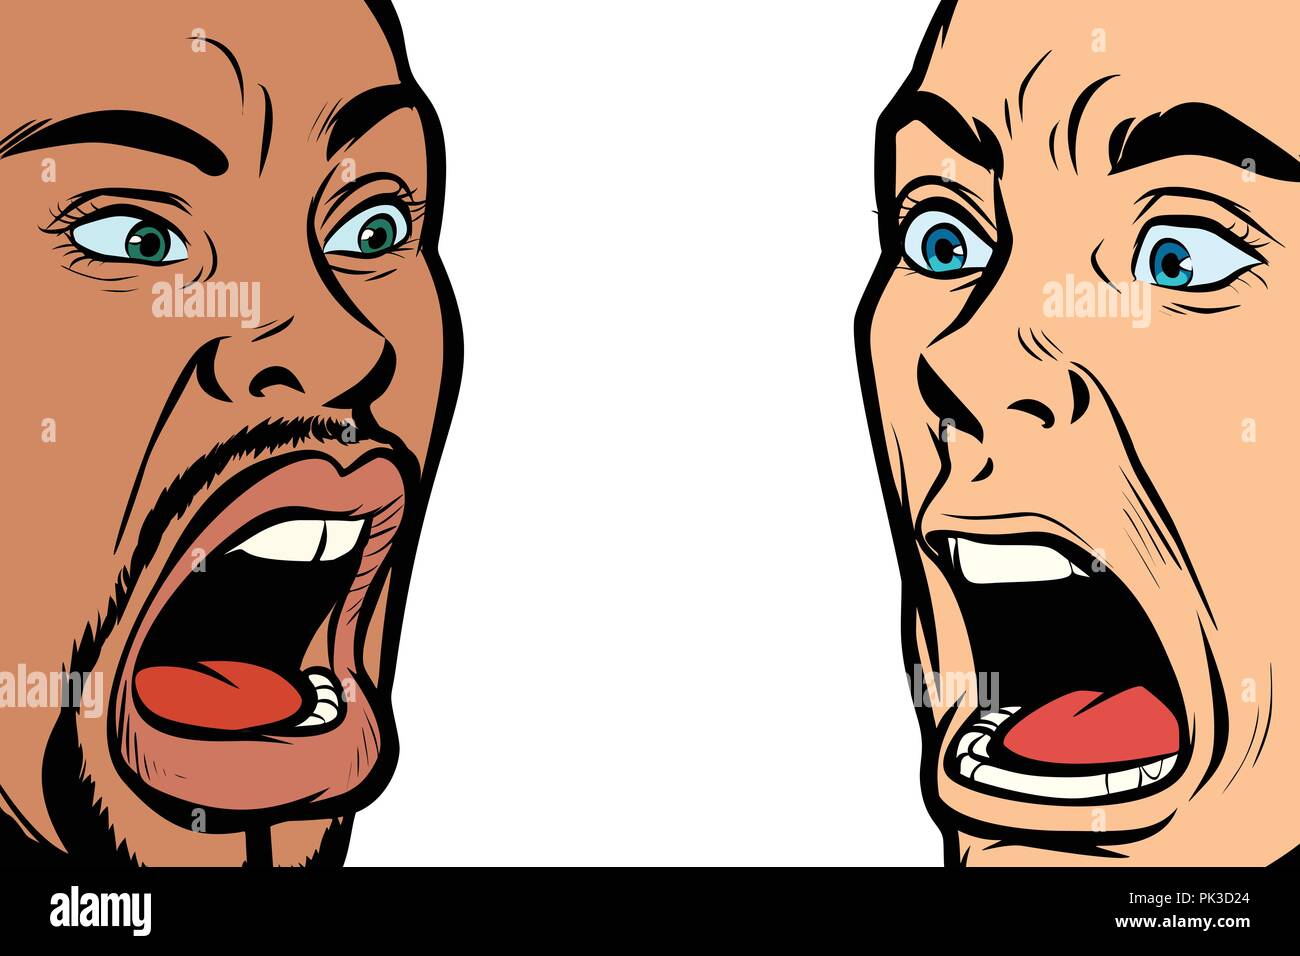 man scream face. African and Caucasian people Stock Vector